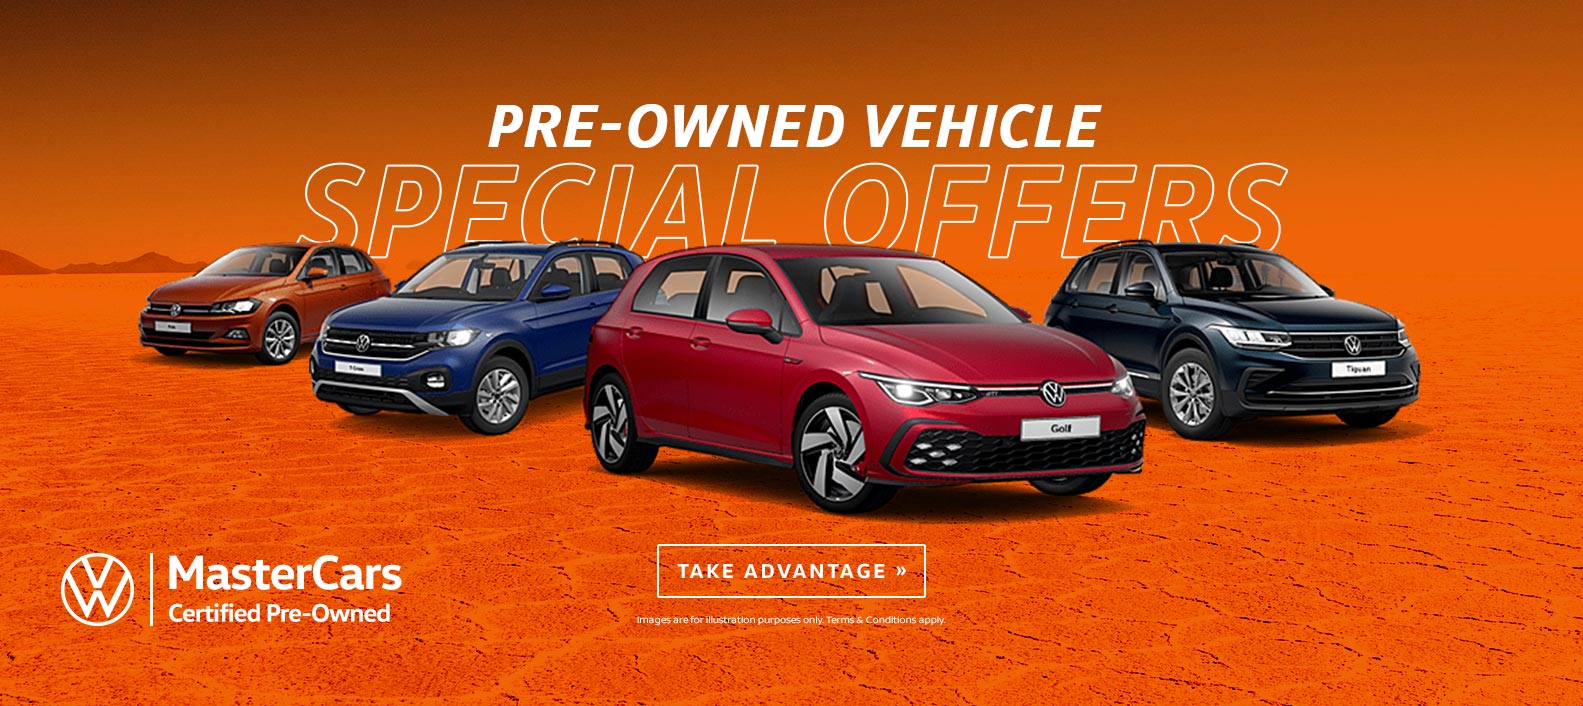 Pre-owned Vehicle Specials Offers